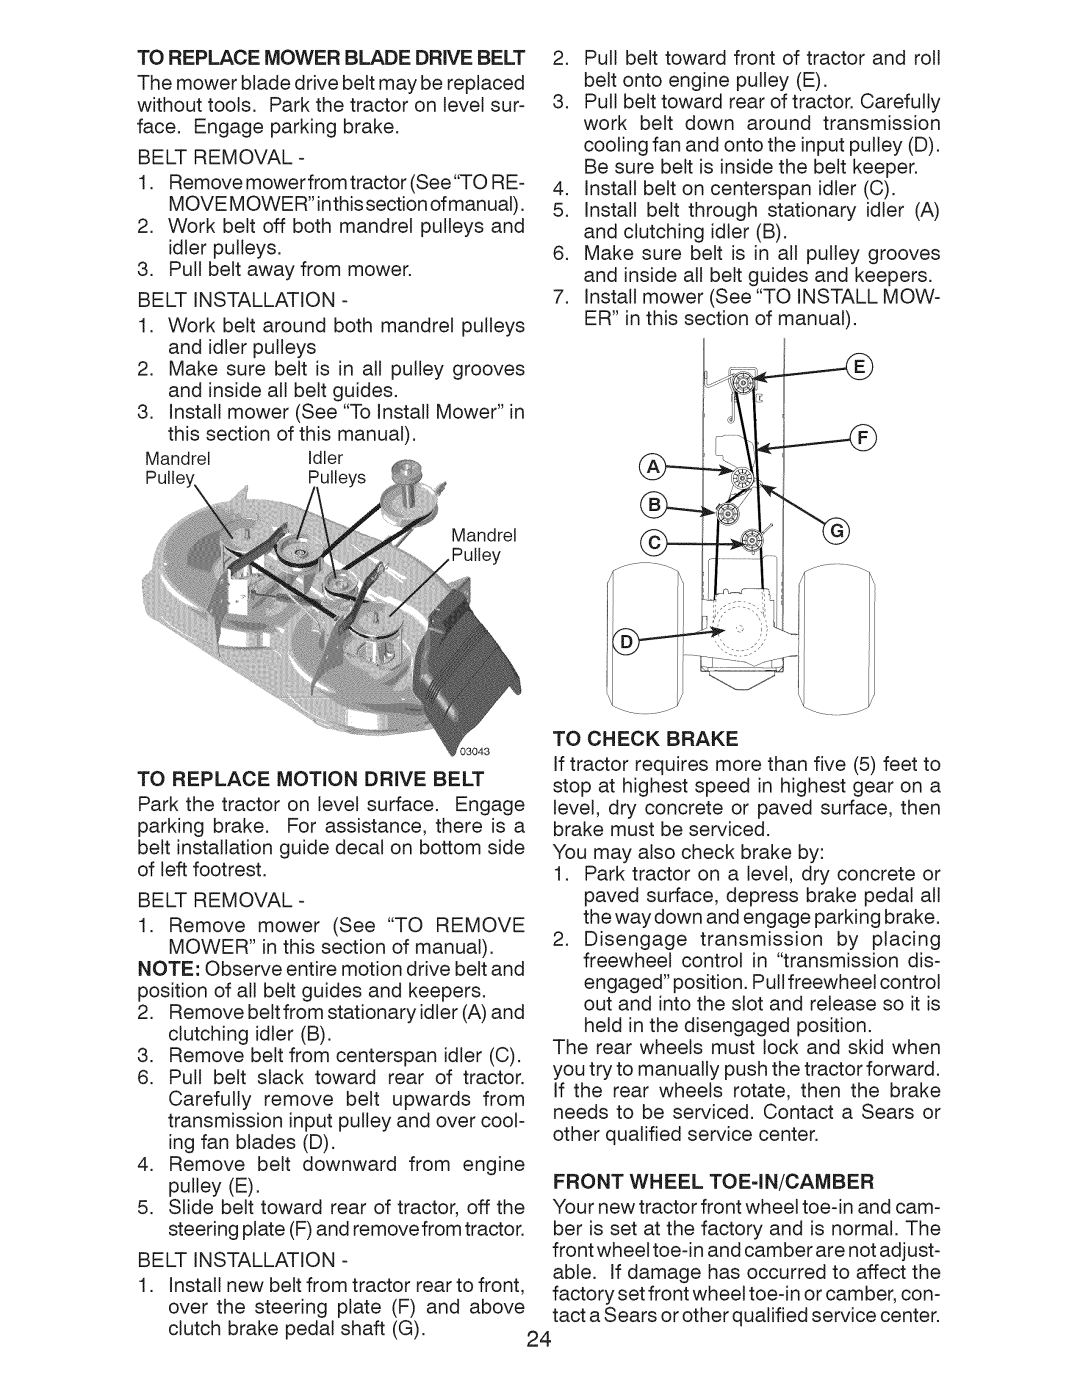 Craftsman 917.28922 owner manual To Replace Mower Blade Drive Belt 